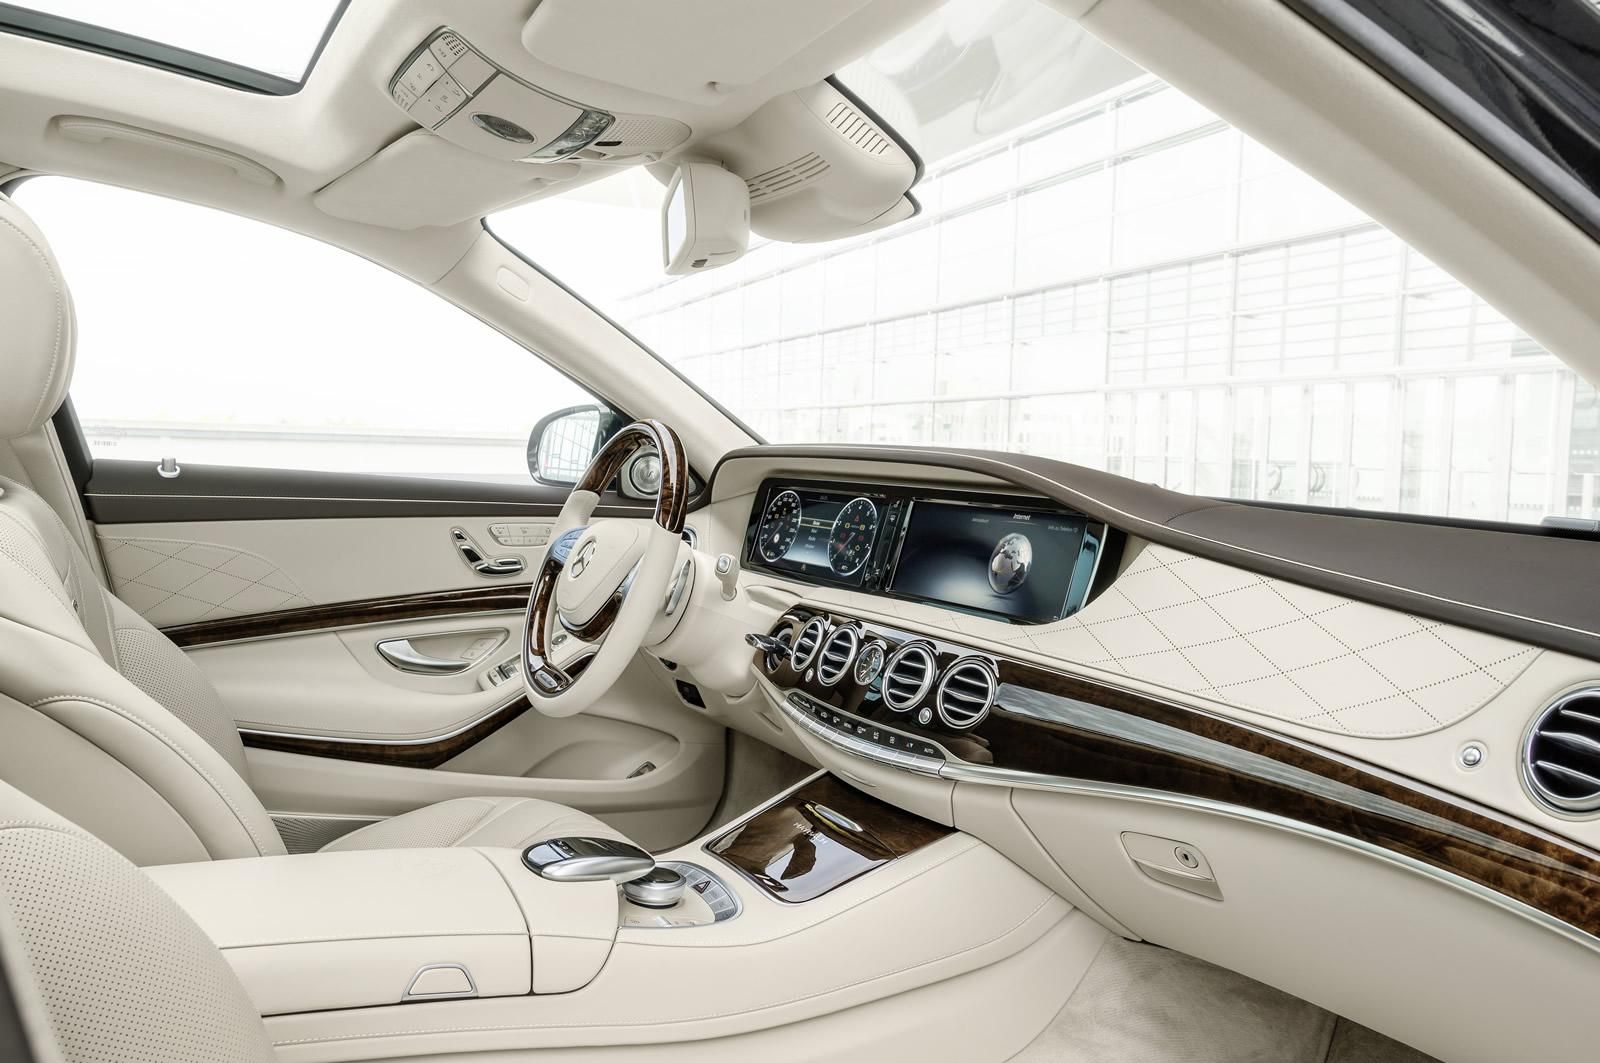 YEN 2015 MERCEDES MAYBACH S SERS RESM GALERS